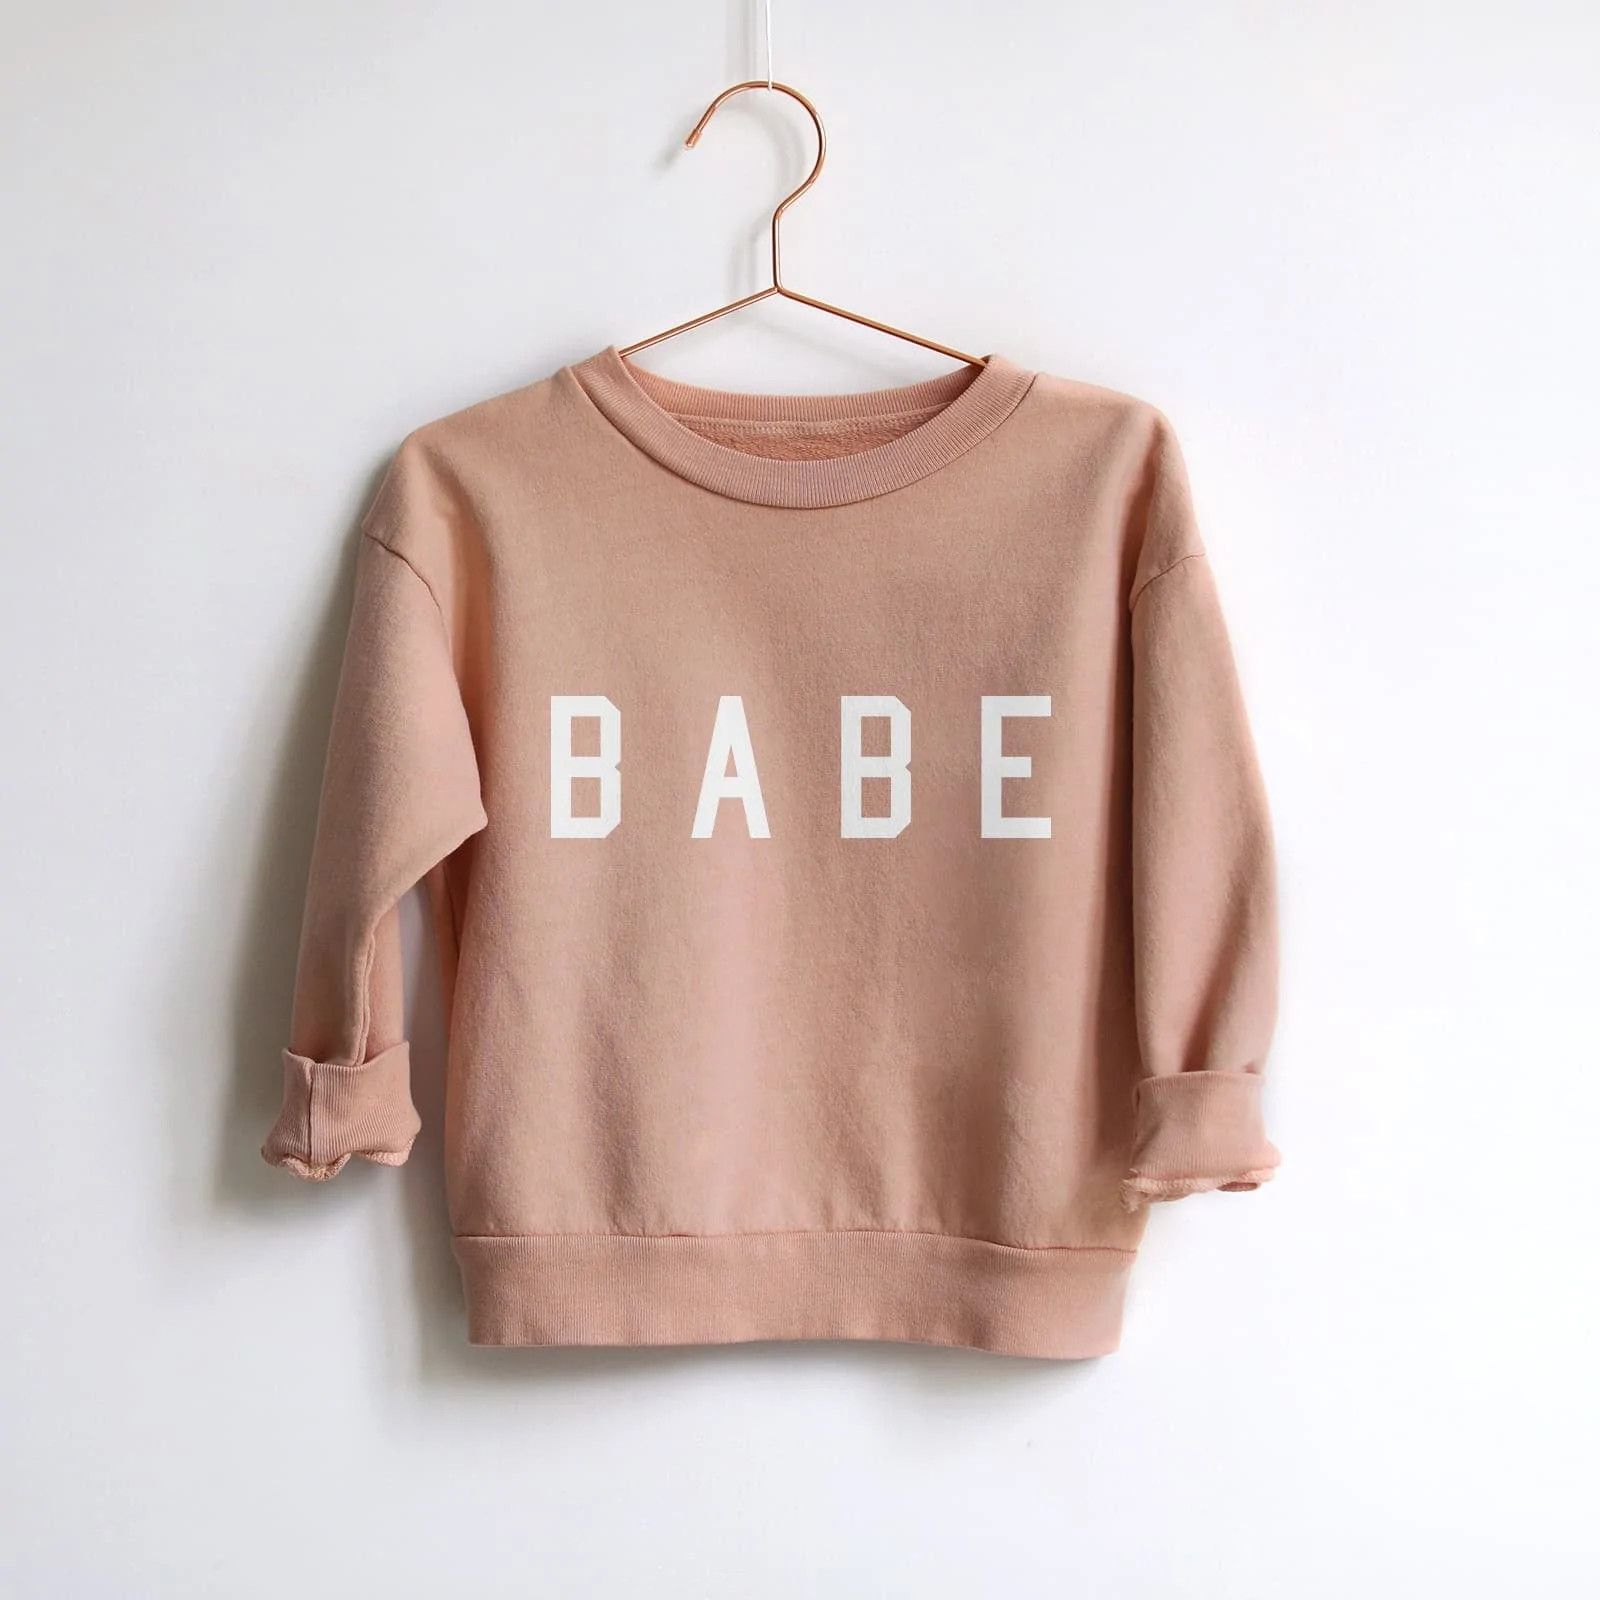 Kids Babe Everyday Sweatshirt in Rose Color - Ford And Wyatt | Ford and Wyatt